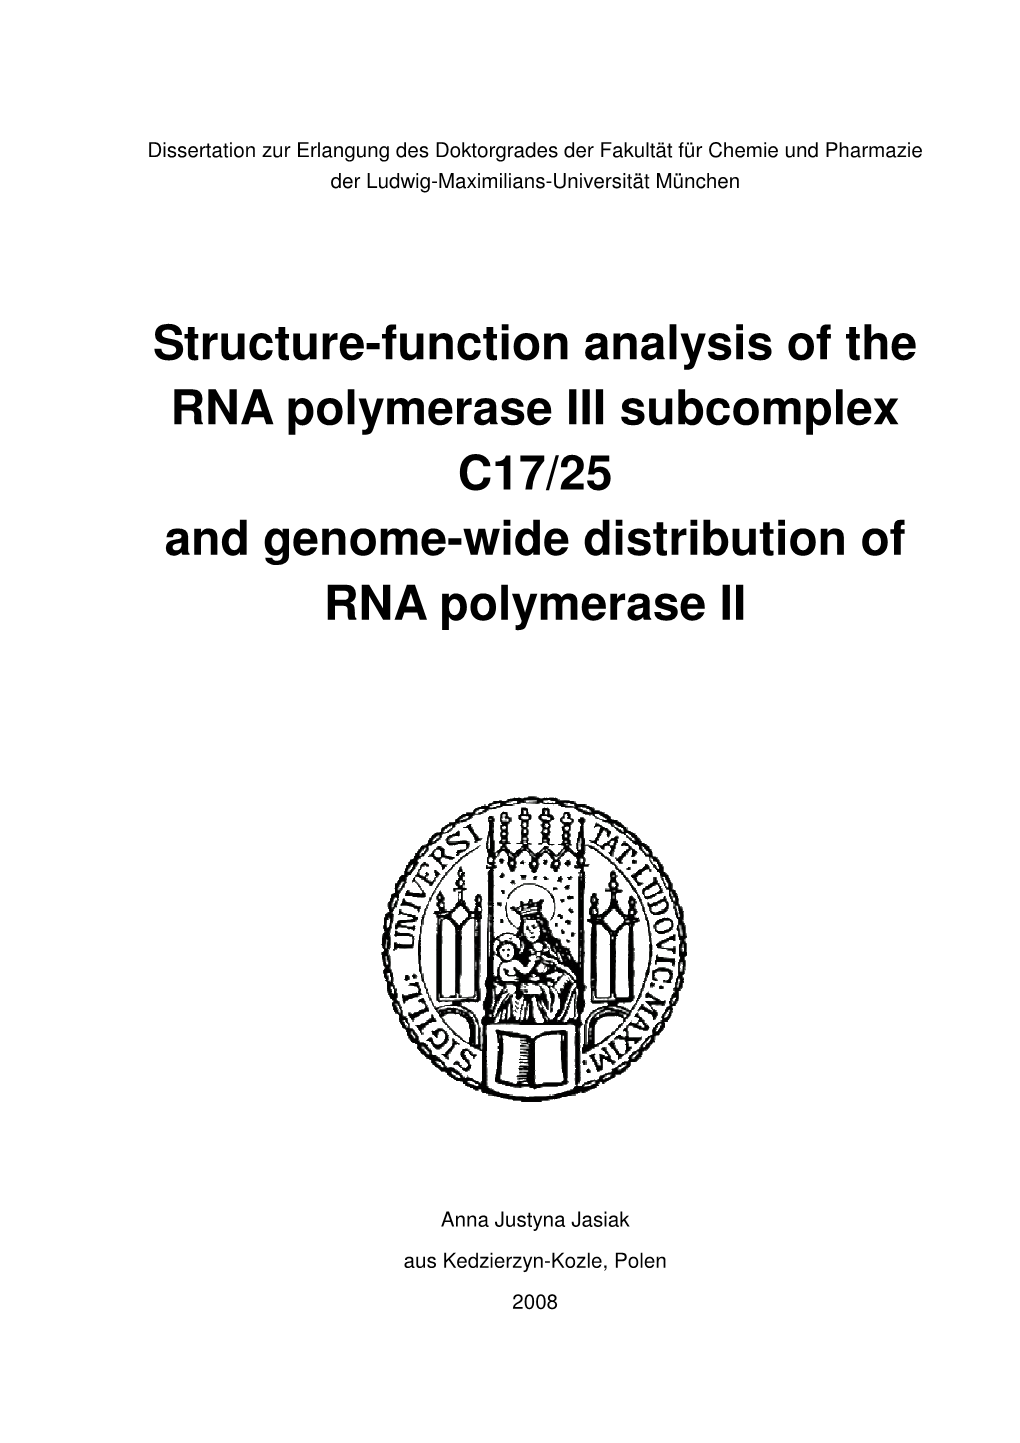 Structure-Function Analysis of the RNA Polymerase III Subcomplex C17/25 and Genome-Wide Distribution of RNA Polymerase II